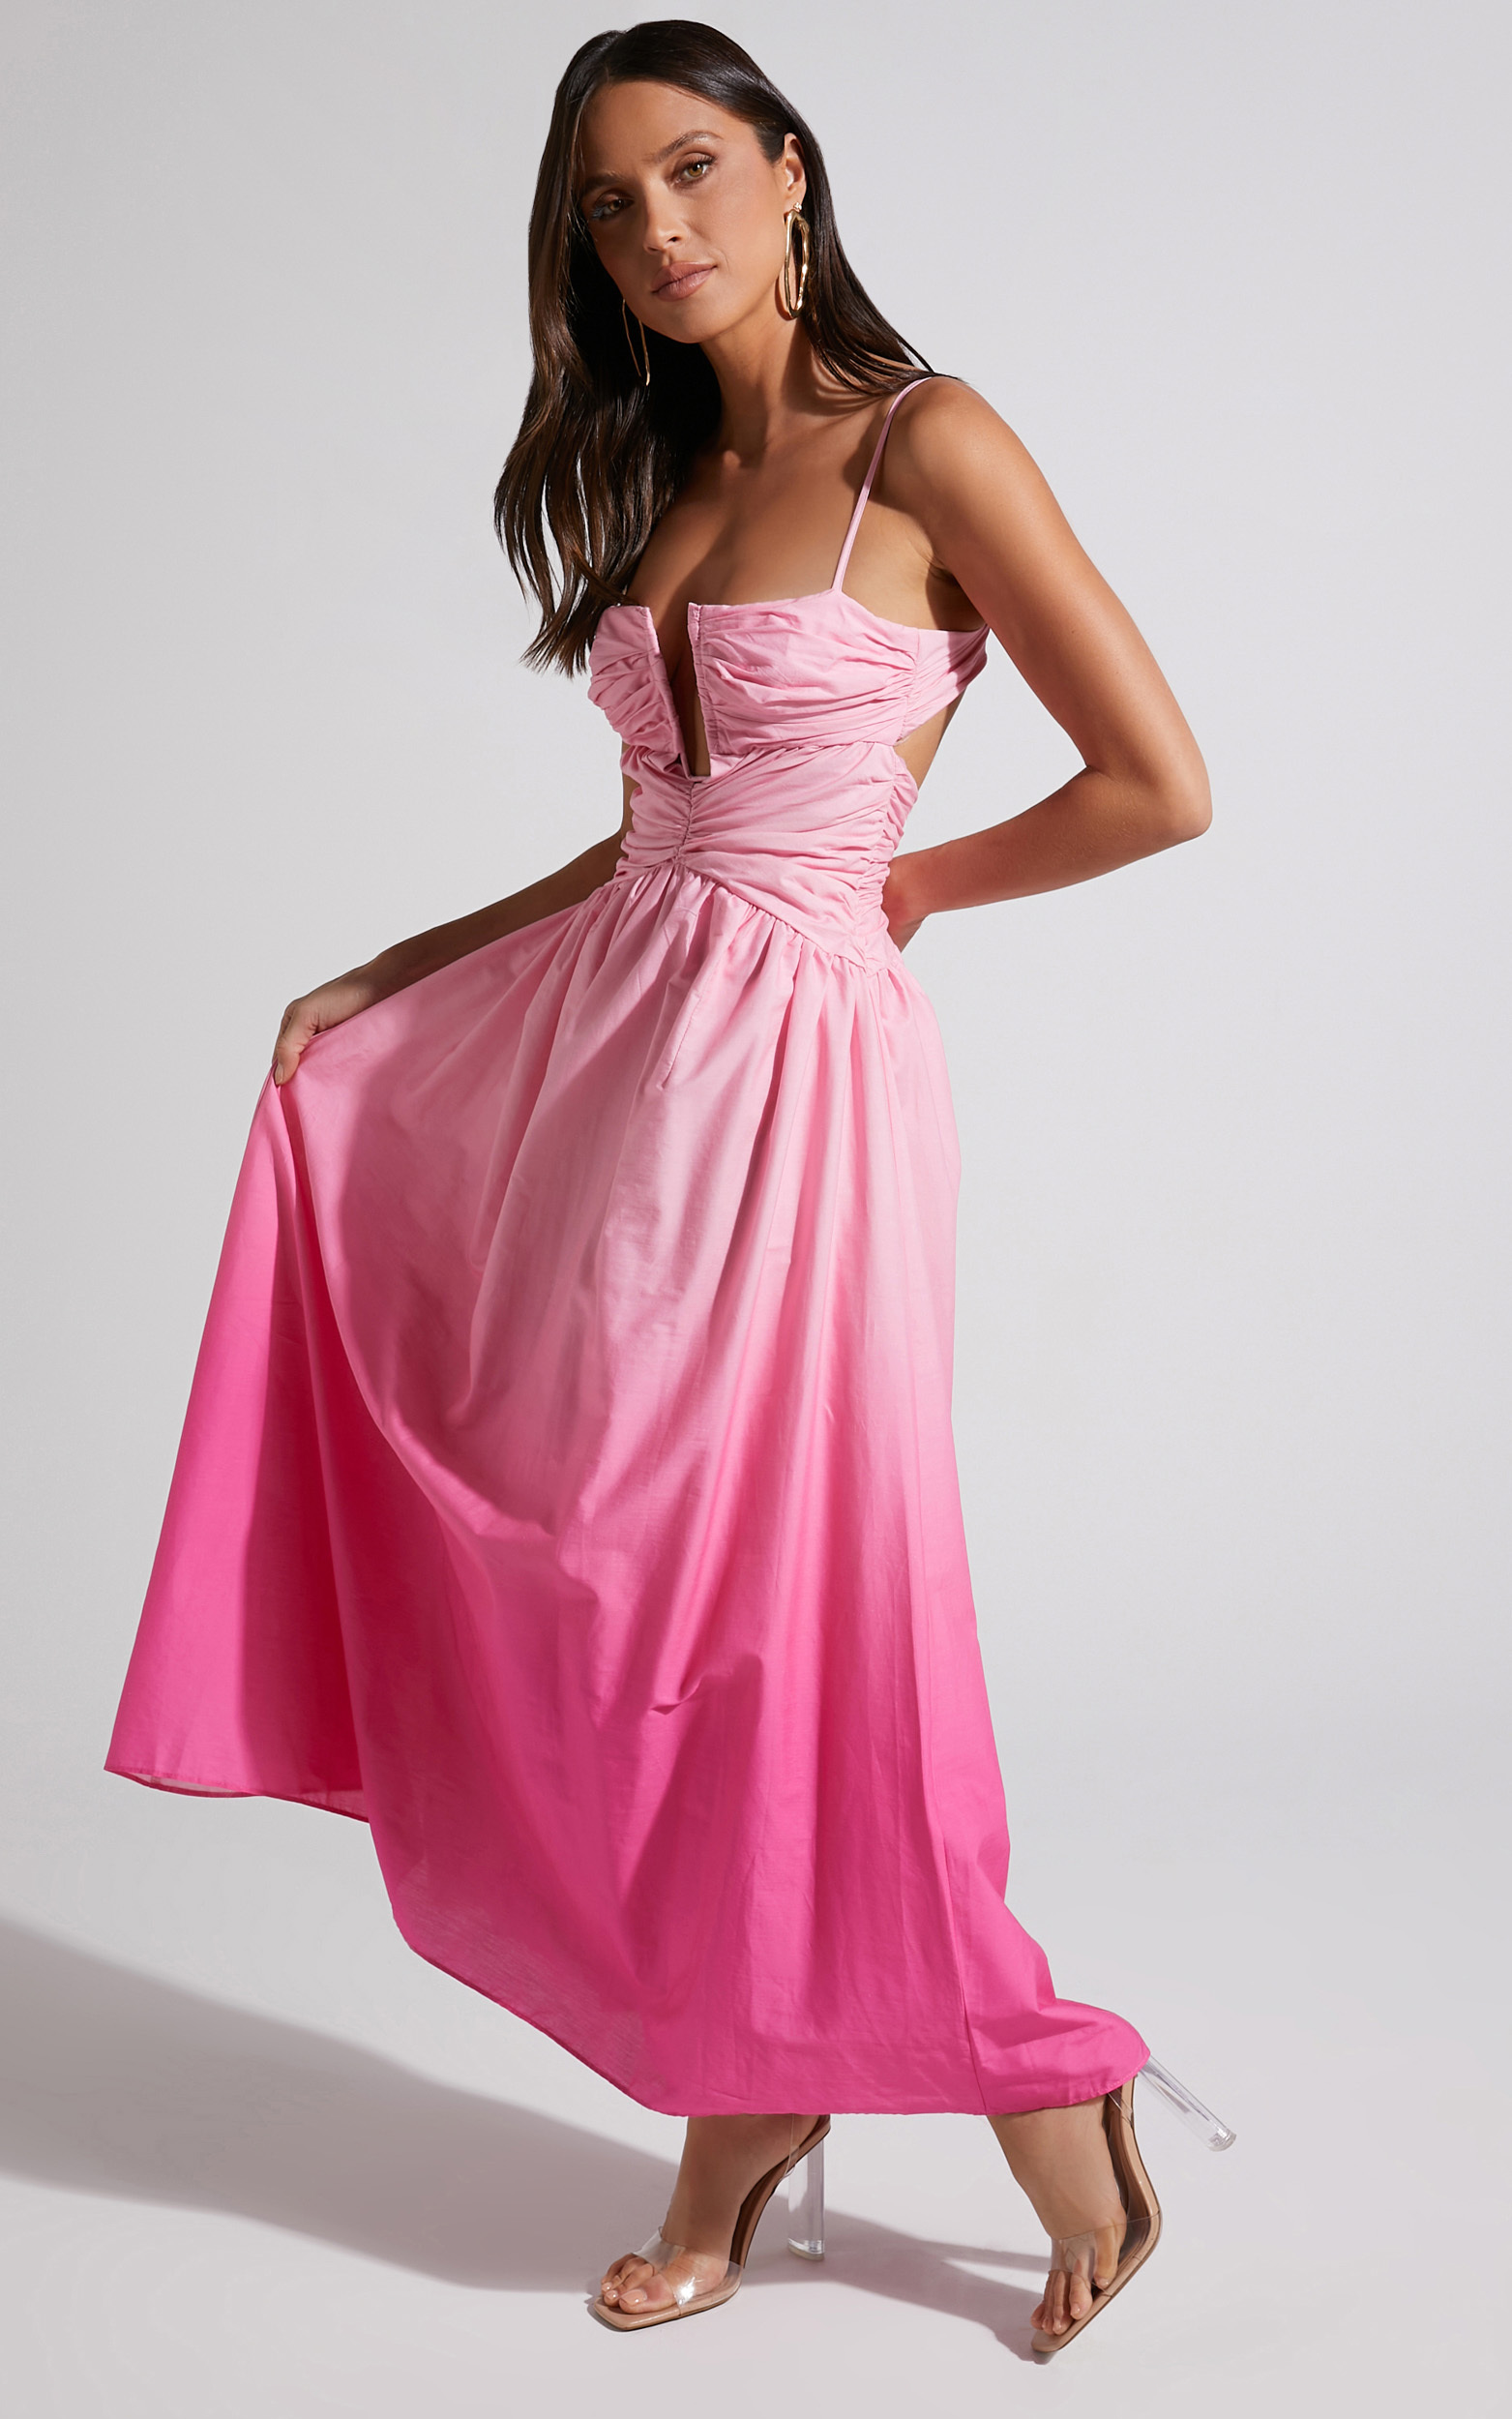 Gianna Square Neck Cut Out Bust Fit and Flare Maxi Dress in Pink Ombre - 06, PNK1, hi-res image number null